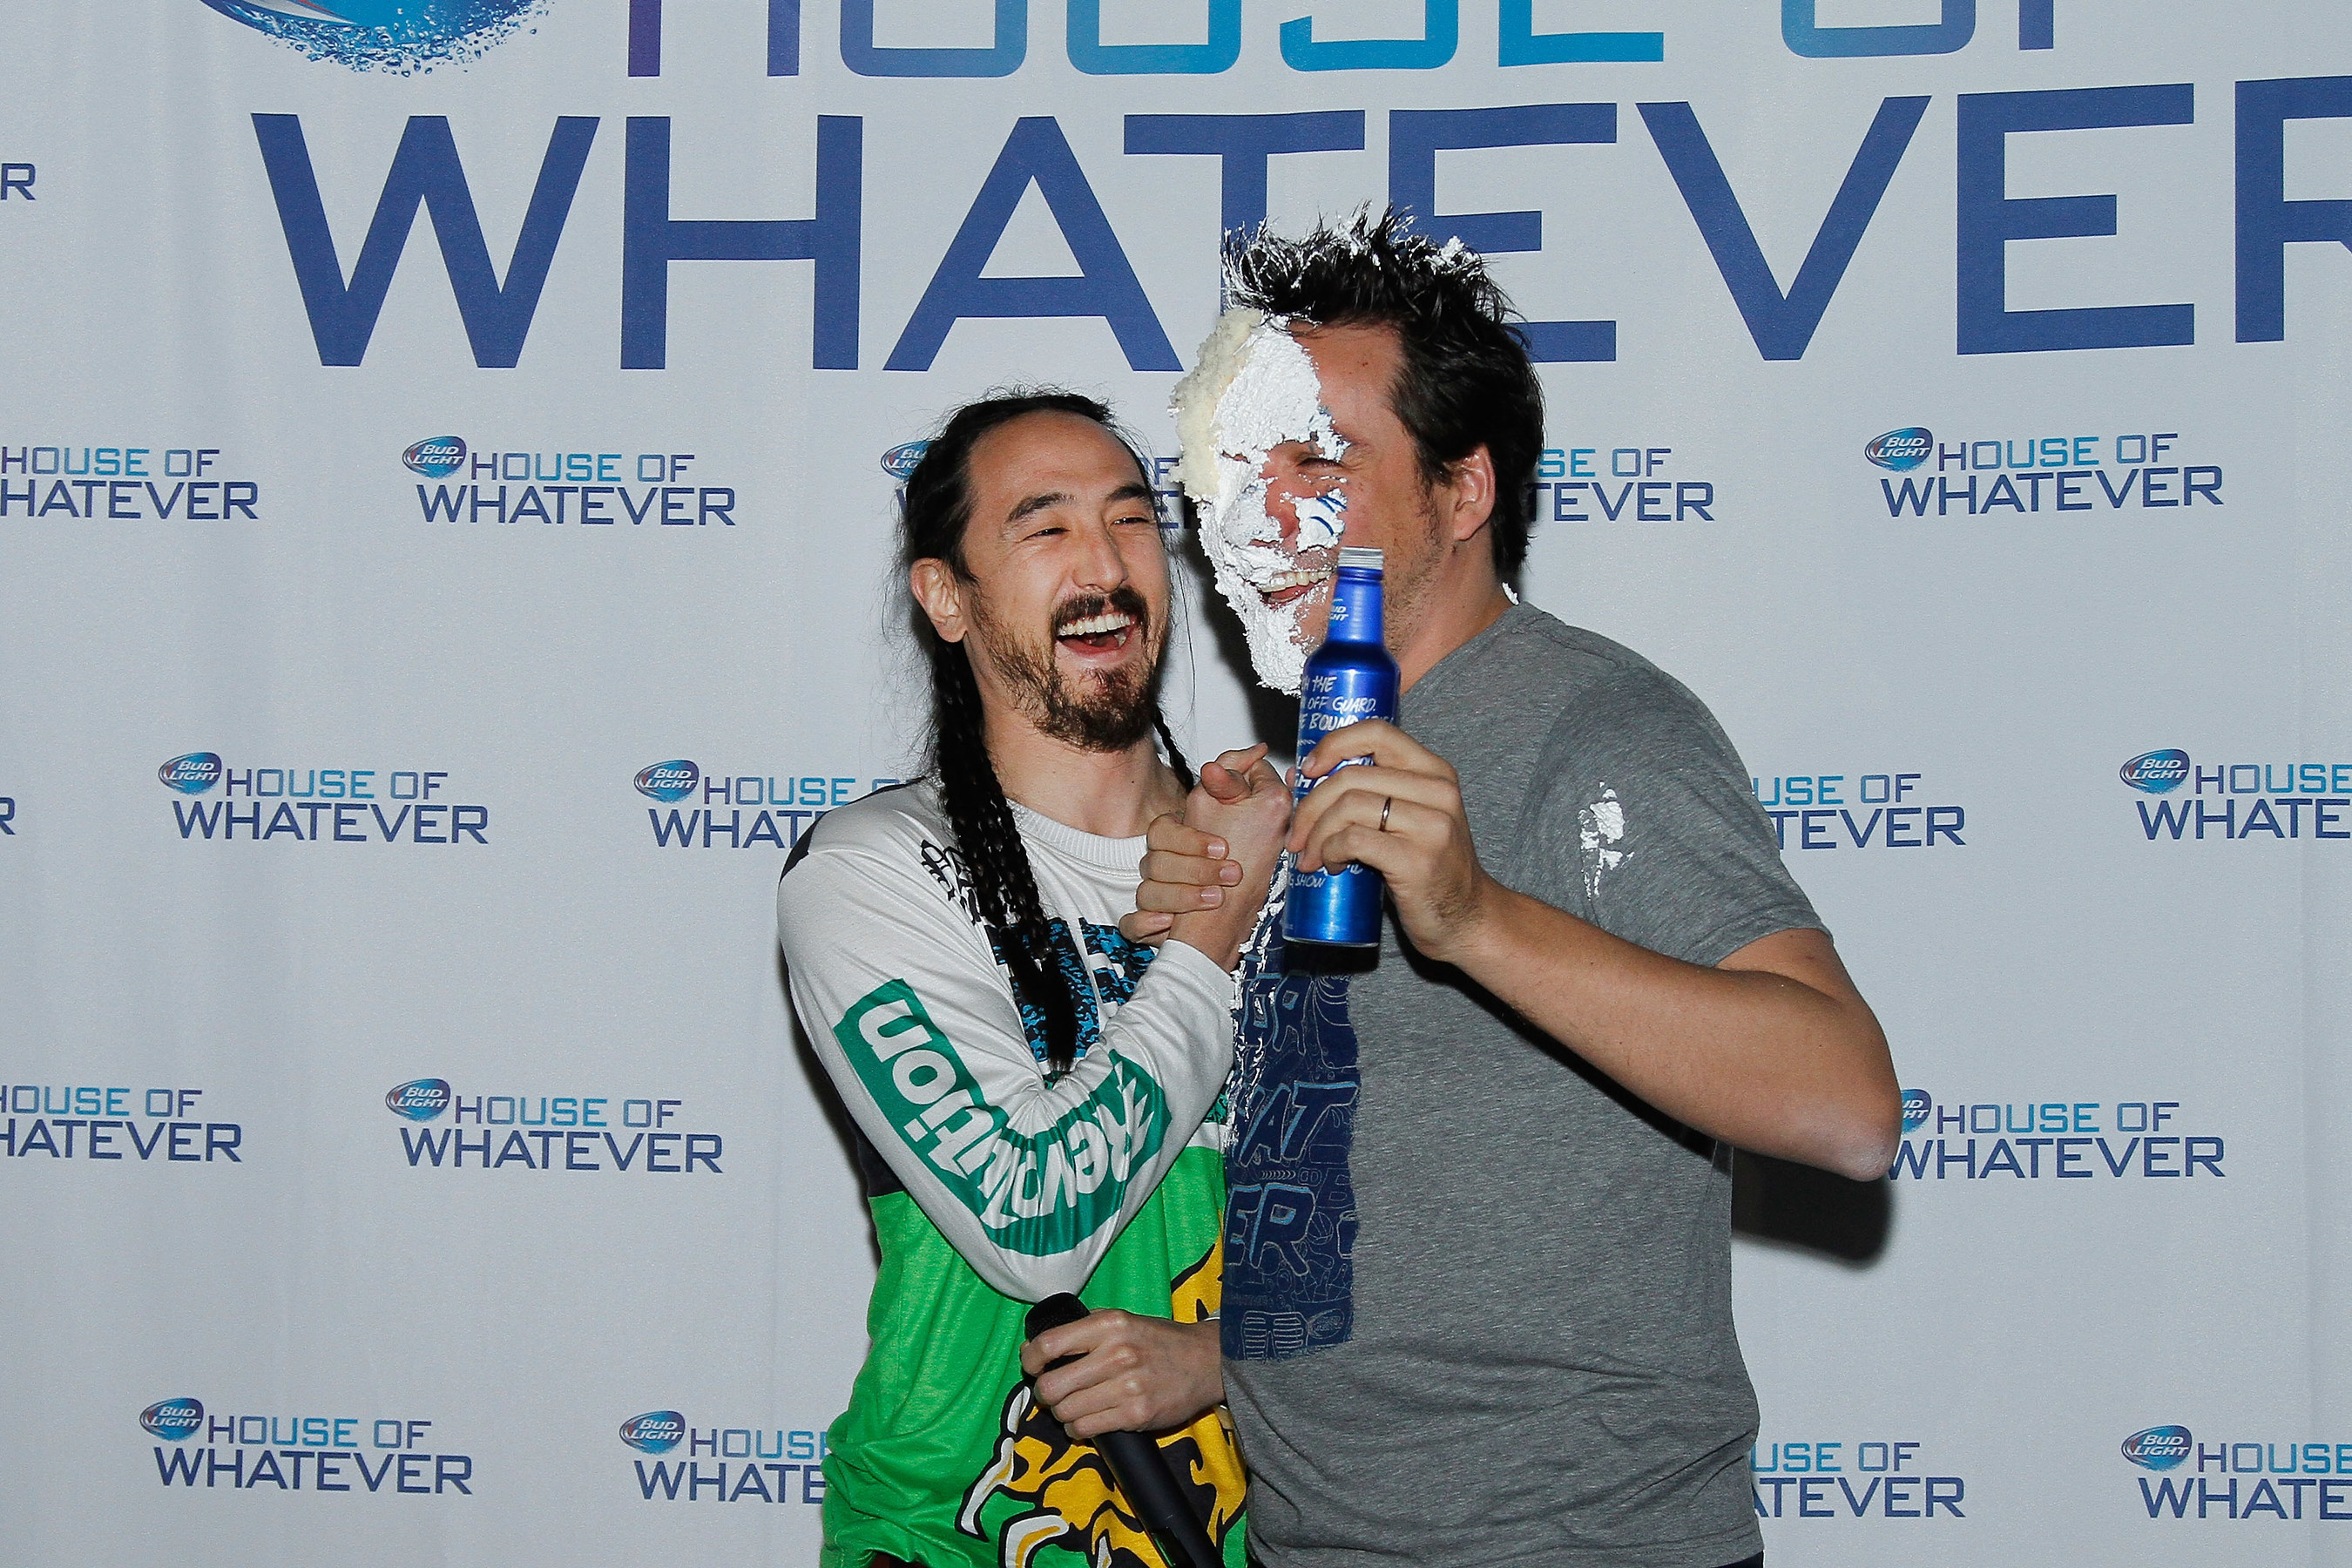 Grammy Award-nominated DJ Steve Aoki smashes cake into the face of Alex Lambrecht, vice president, Bud Light, during the brand's Bud Light House of Whatever unveil event in Phoenix, Ariz.